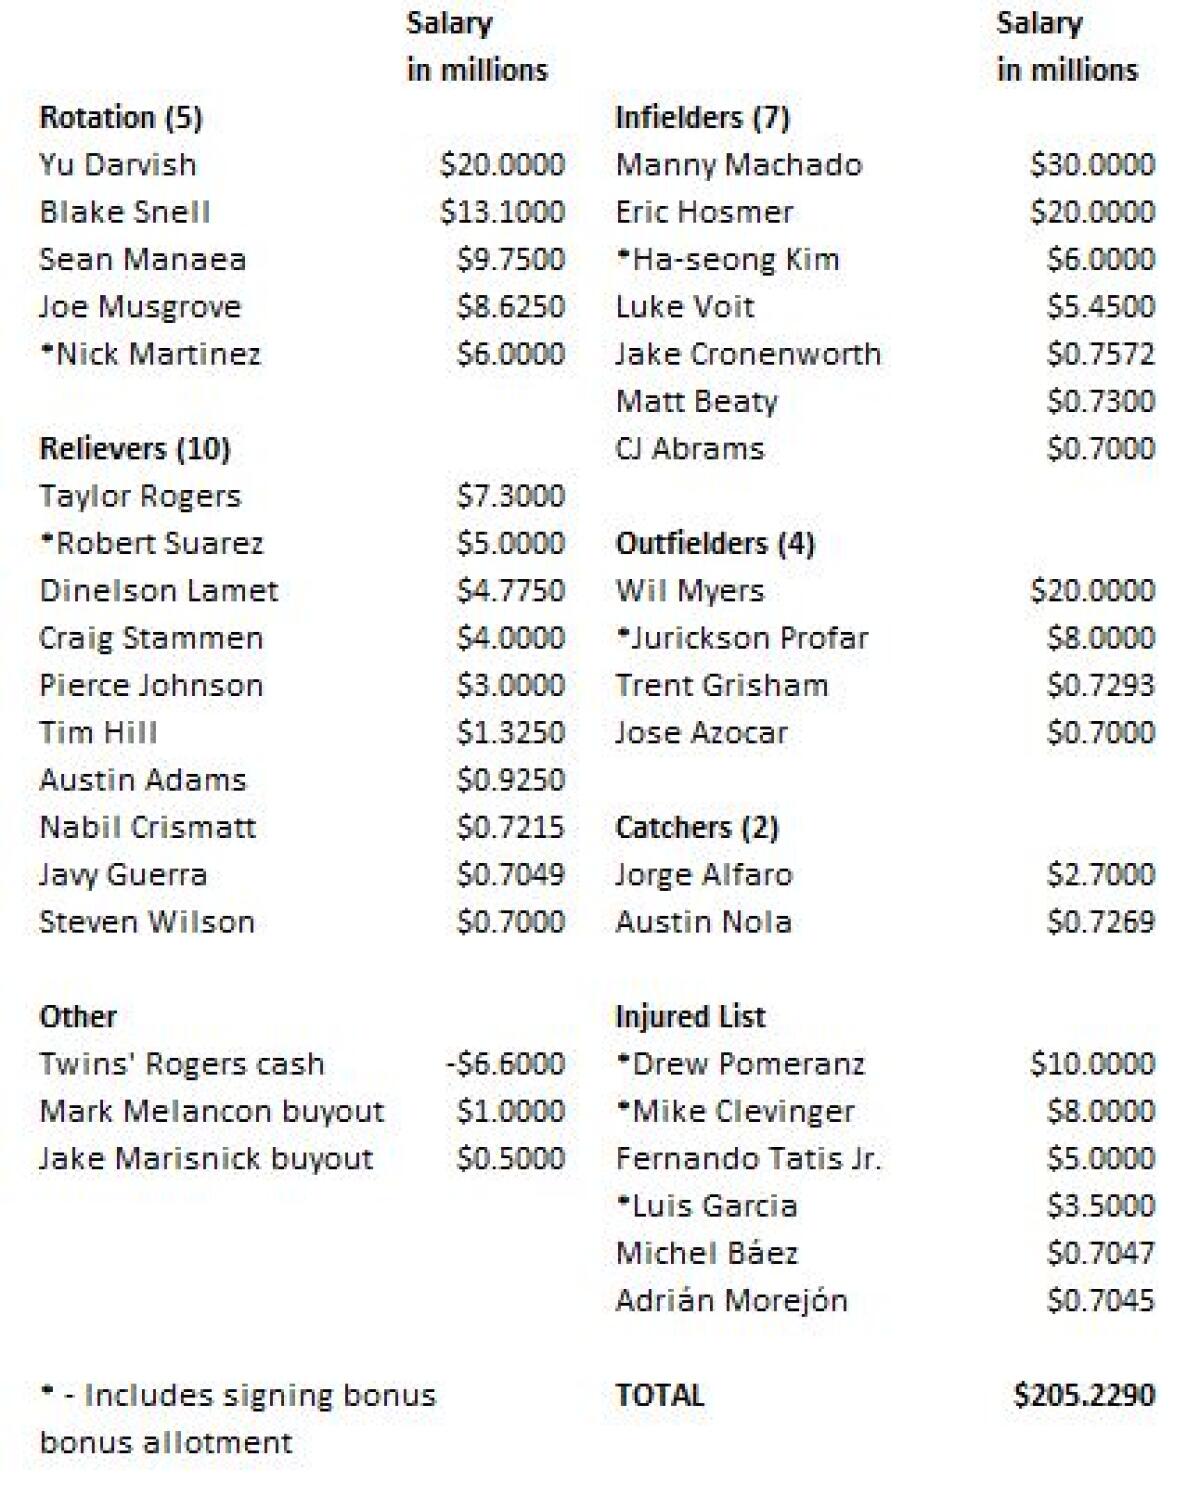 The Padres' 2022 opening day payroll